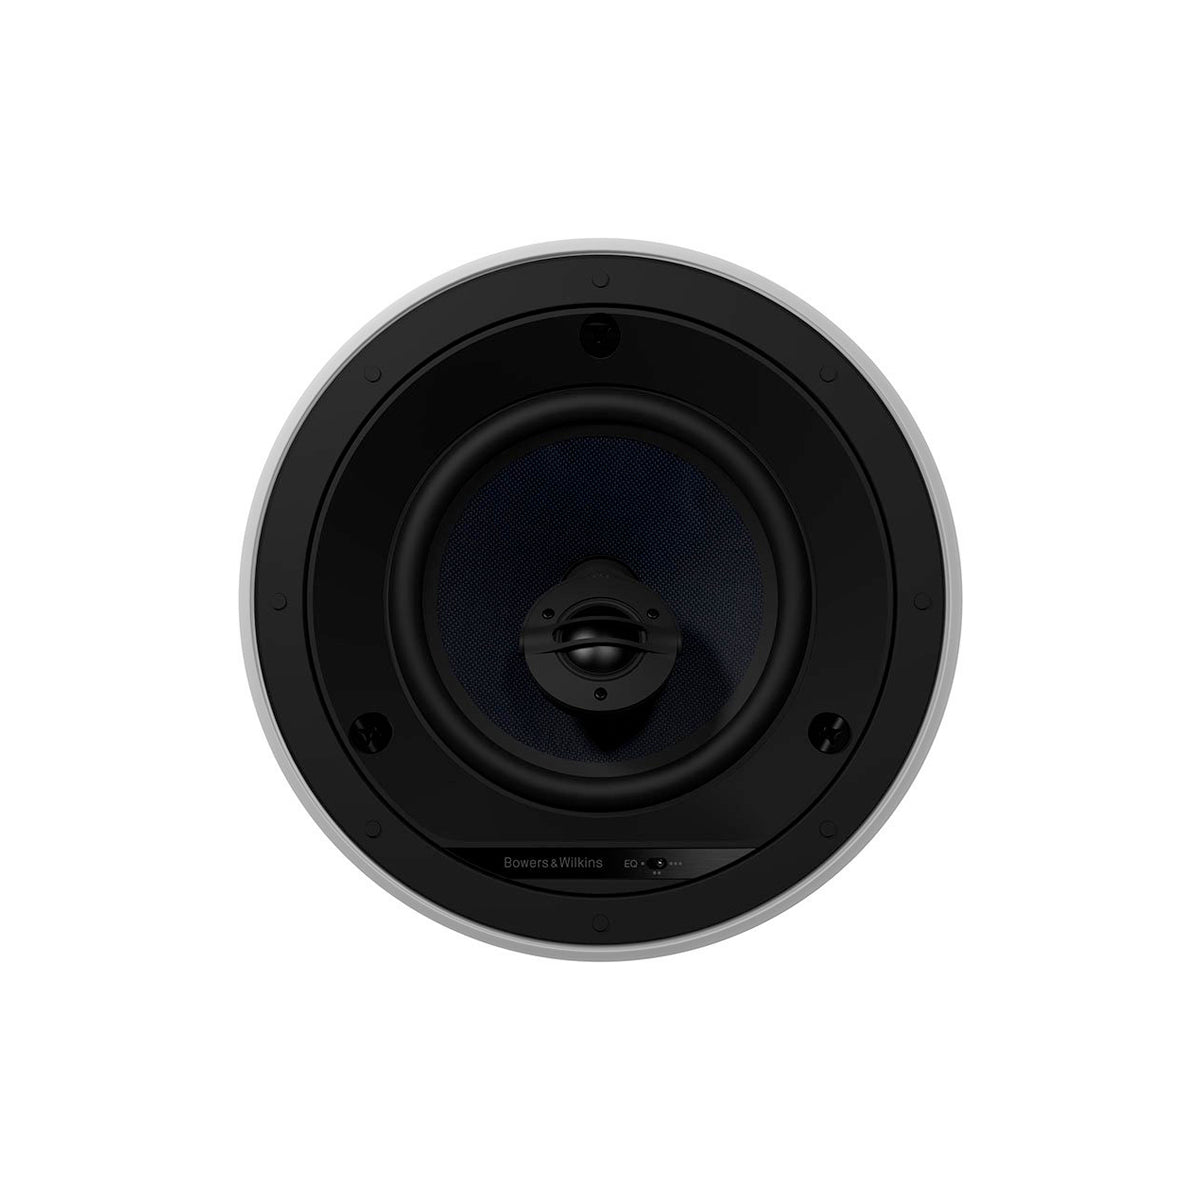 Bowers & Wilkins CCM665 In-Ceiling Speakers - The Audio Experts